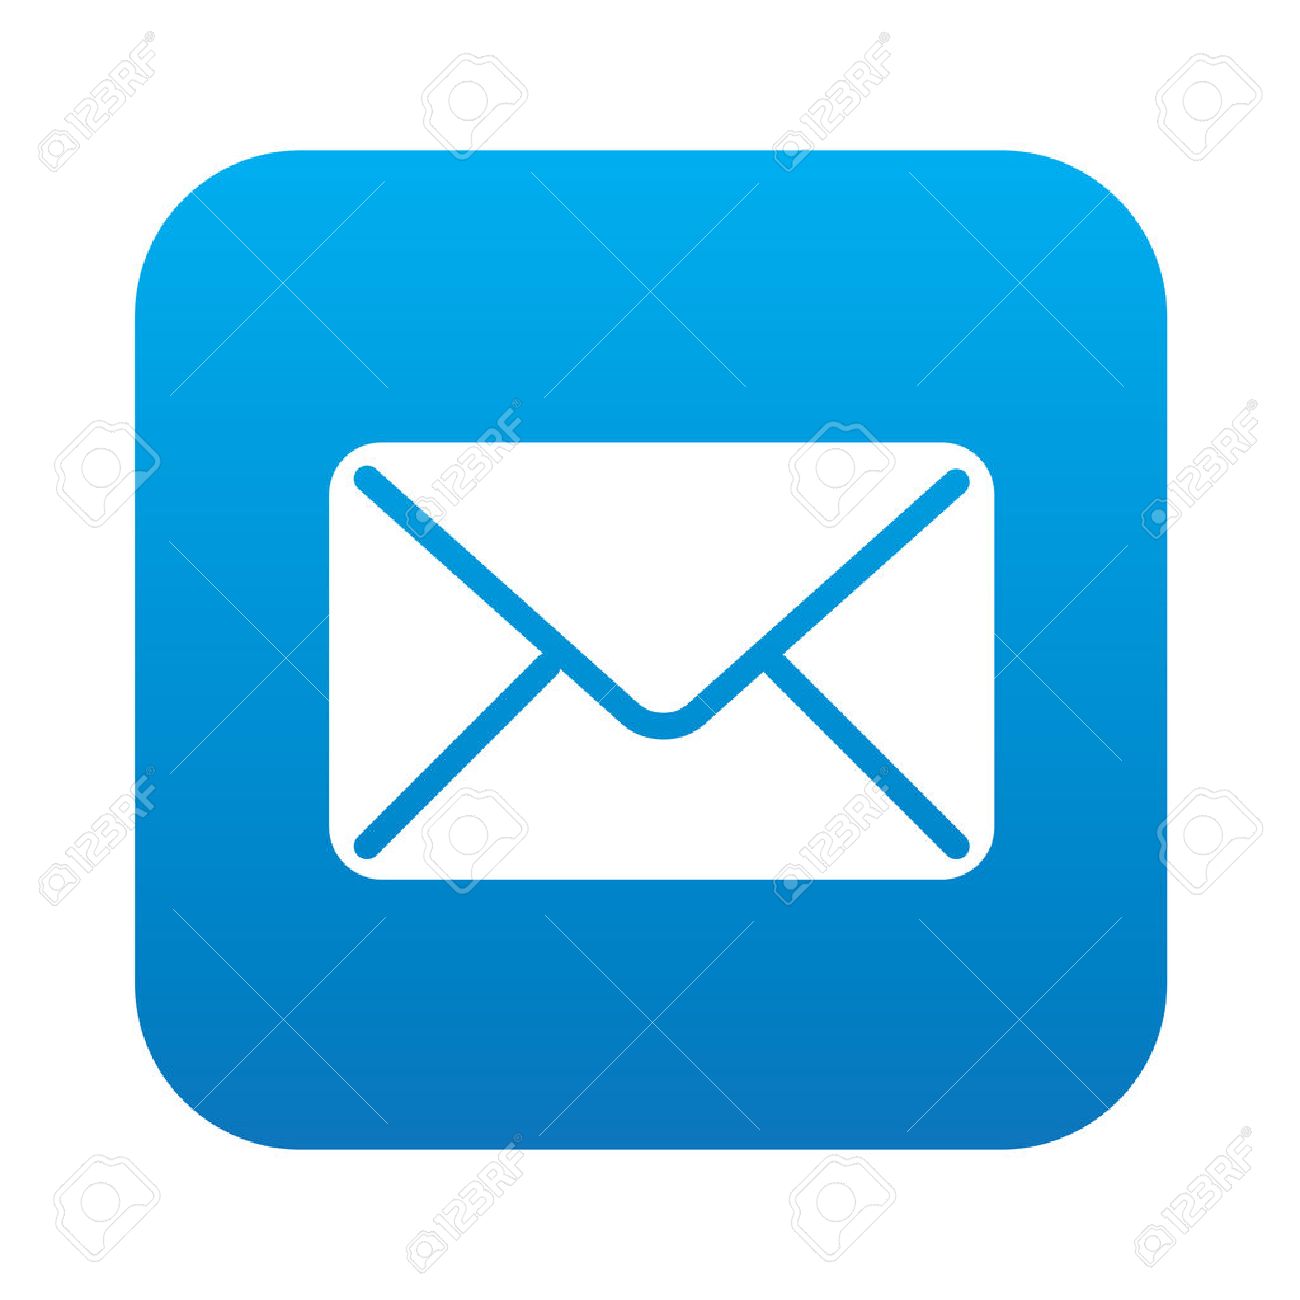 35929070-email-icon-on-blue-background-clean-vector